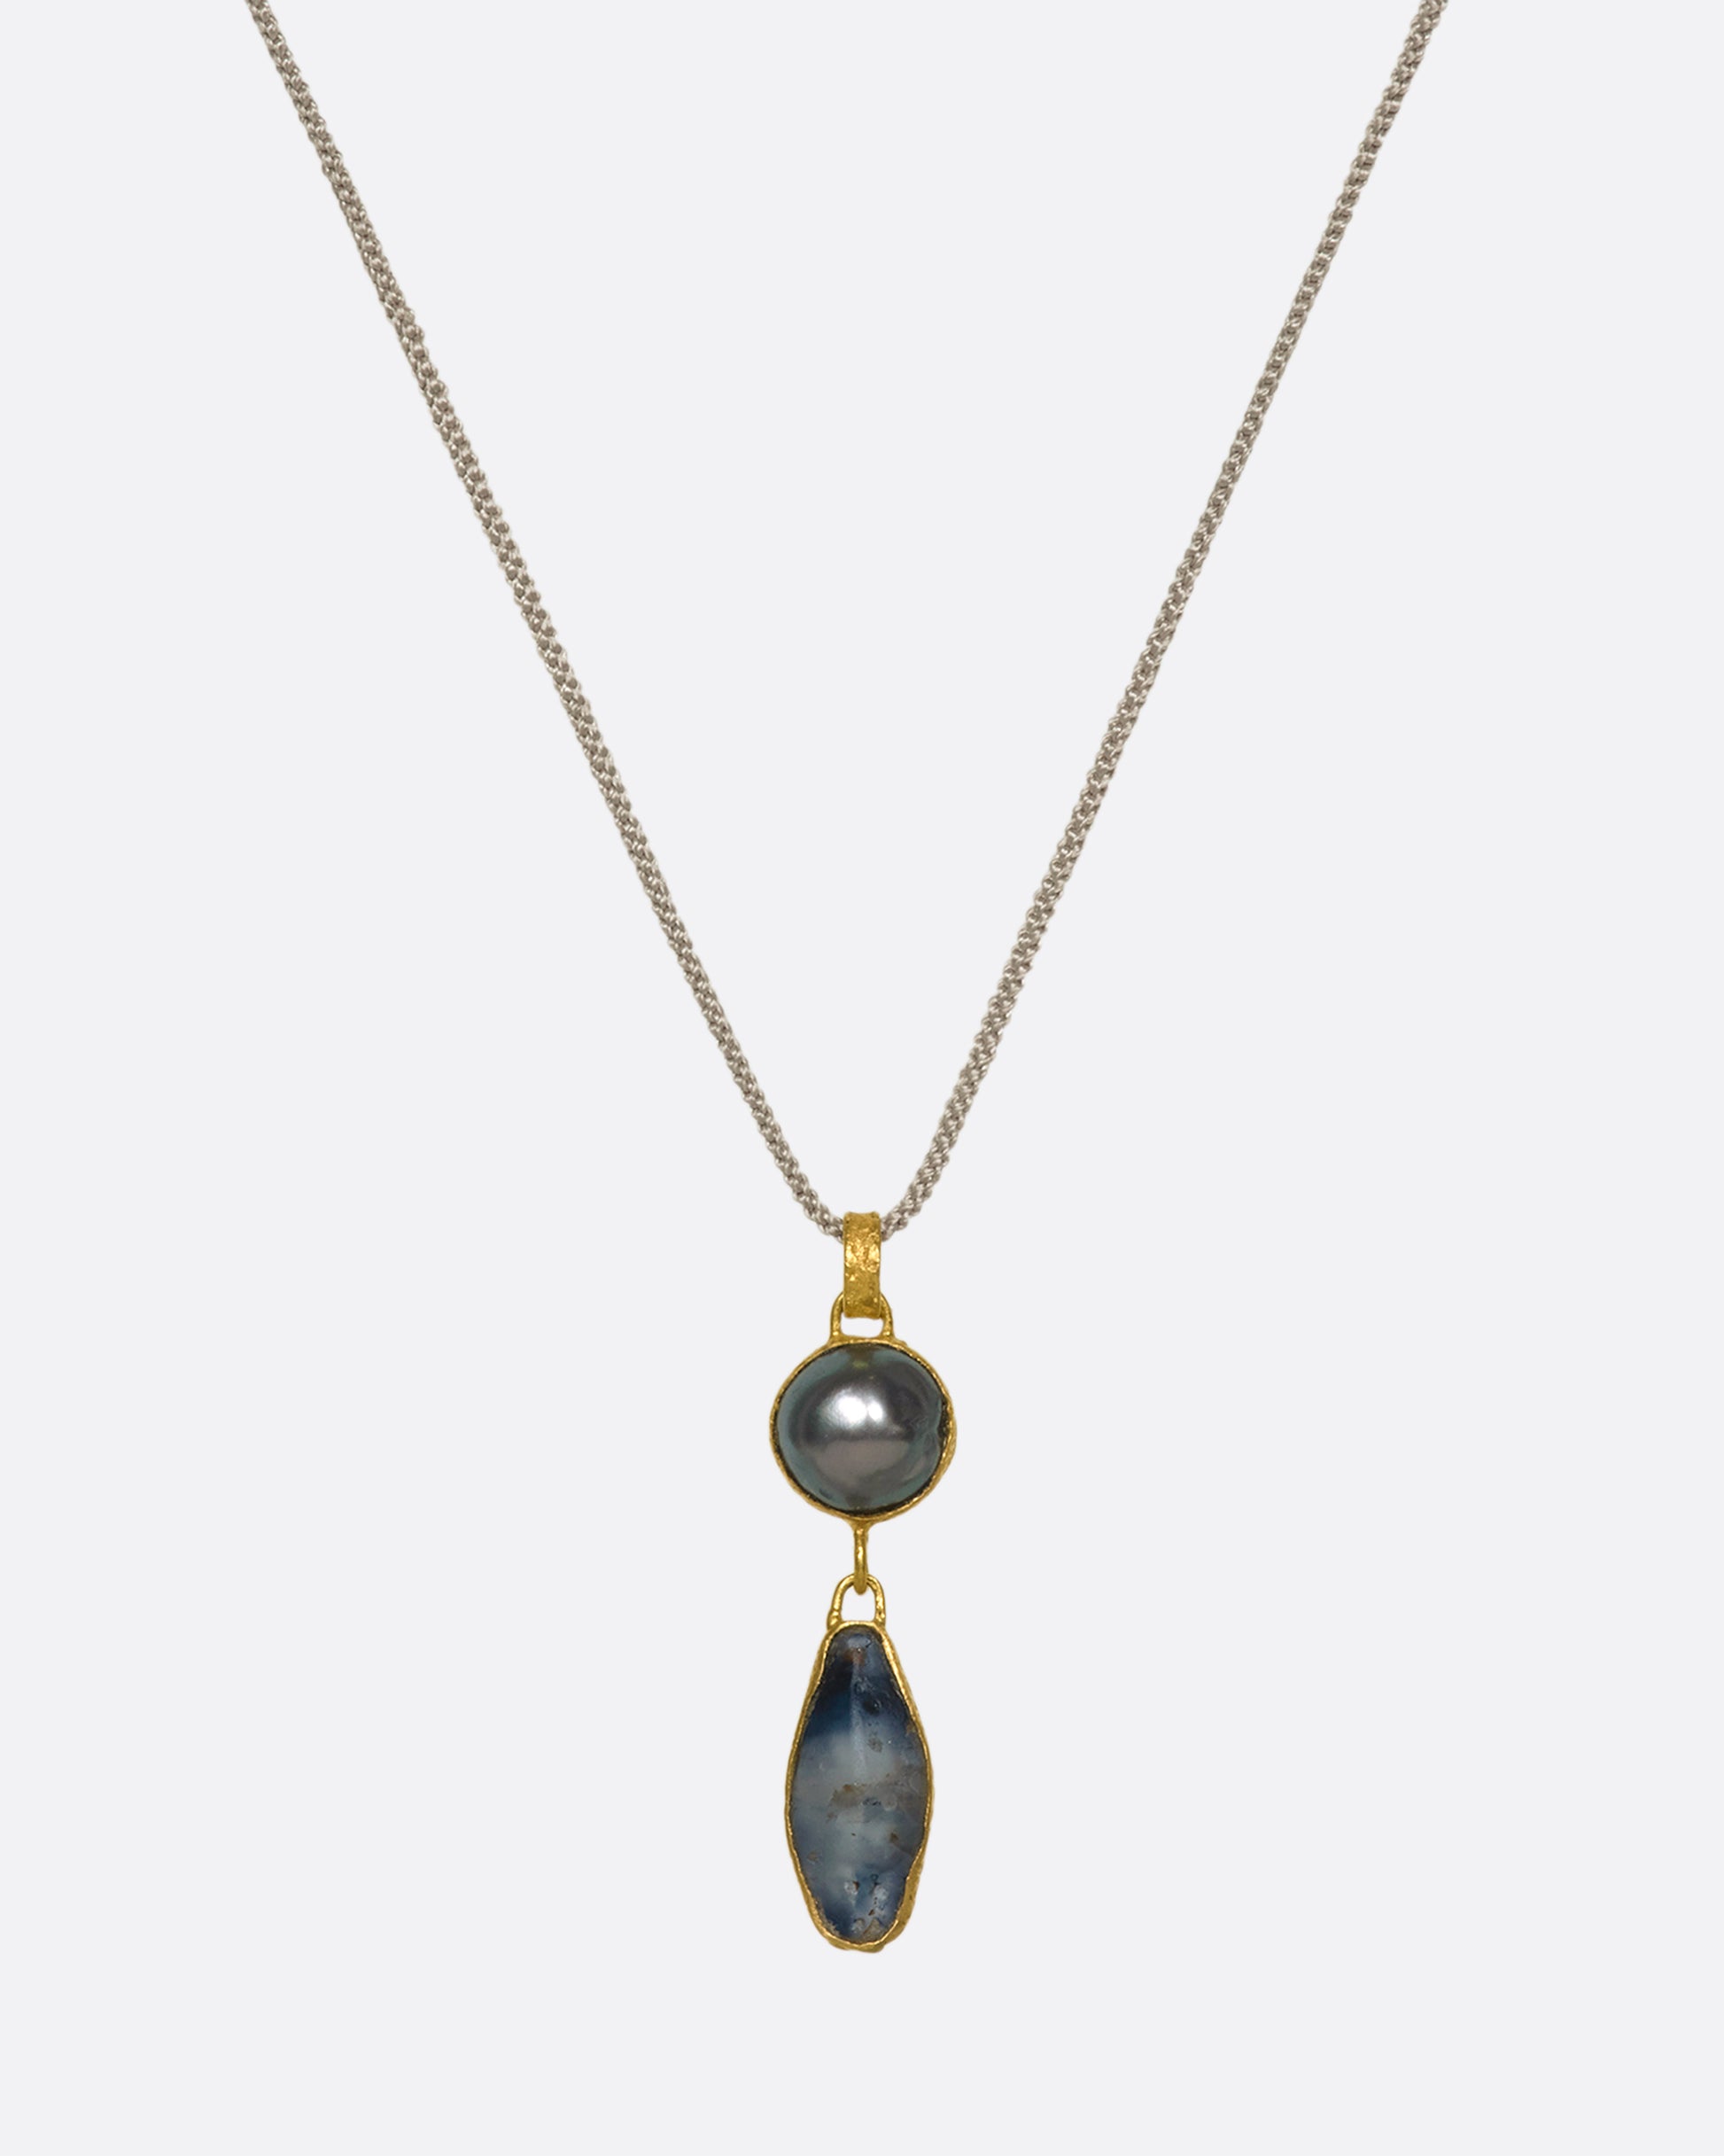 A hanging yellow gold pendant with a pearl and Sri Lankan sapphire on a cord.